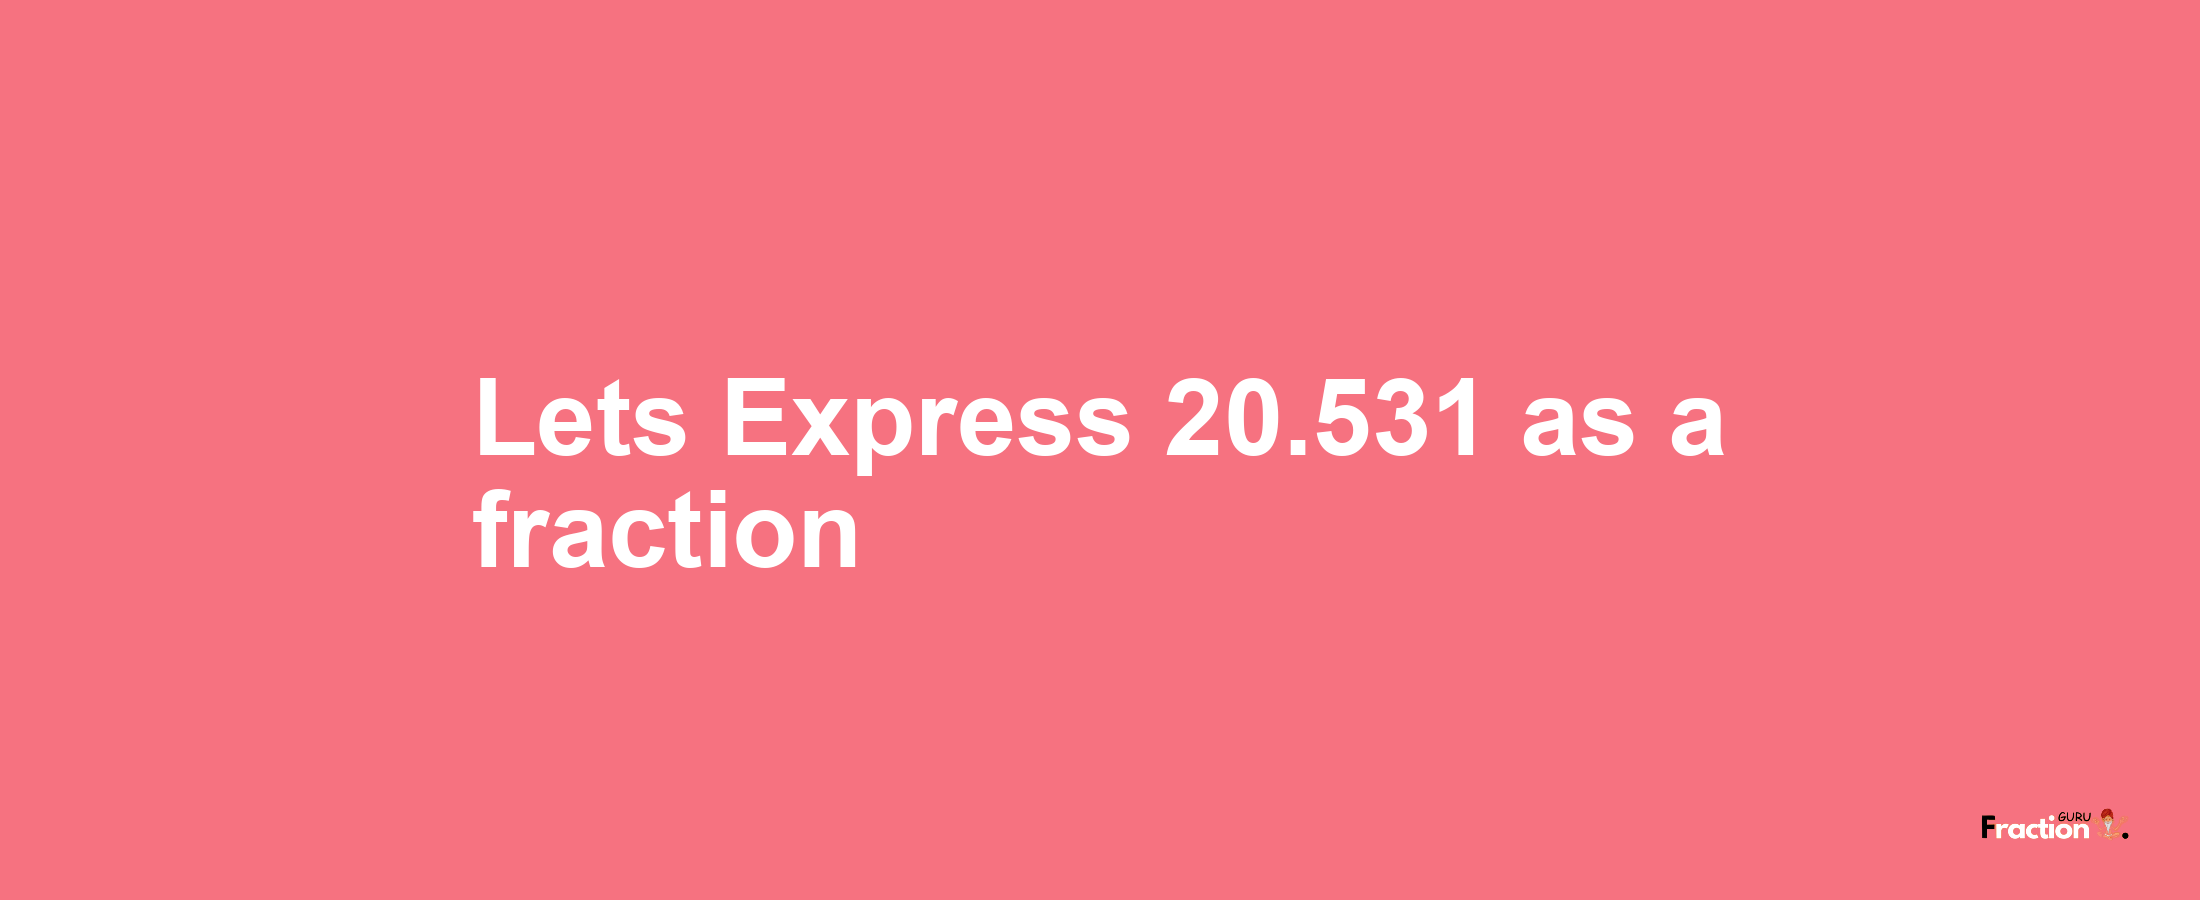 Lets Express 20.531 as afraction